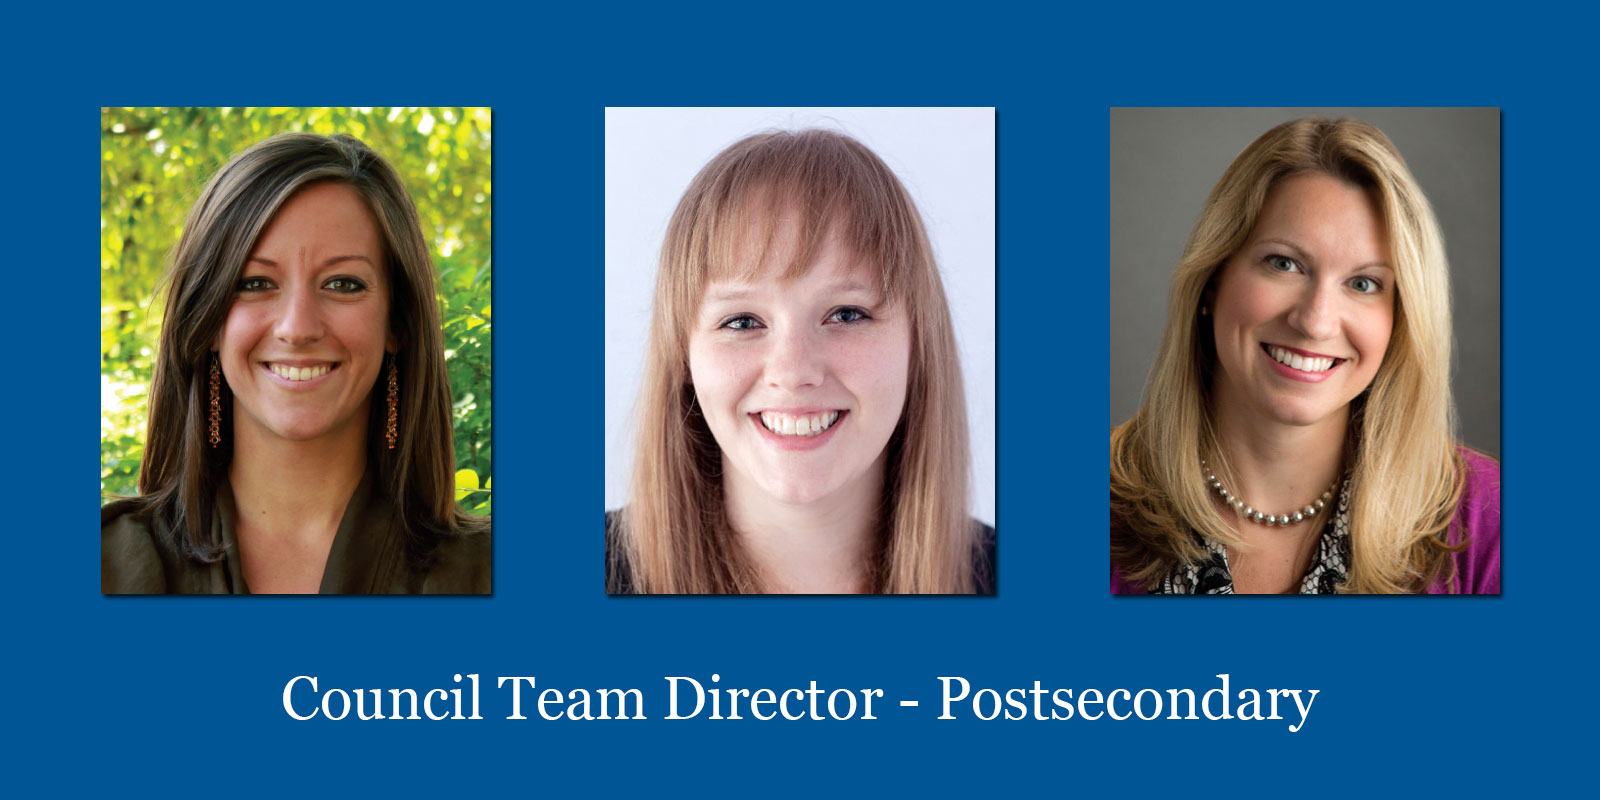 Candidates For Council Team Director Postsecondary